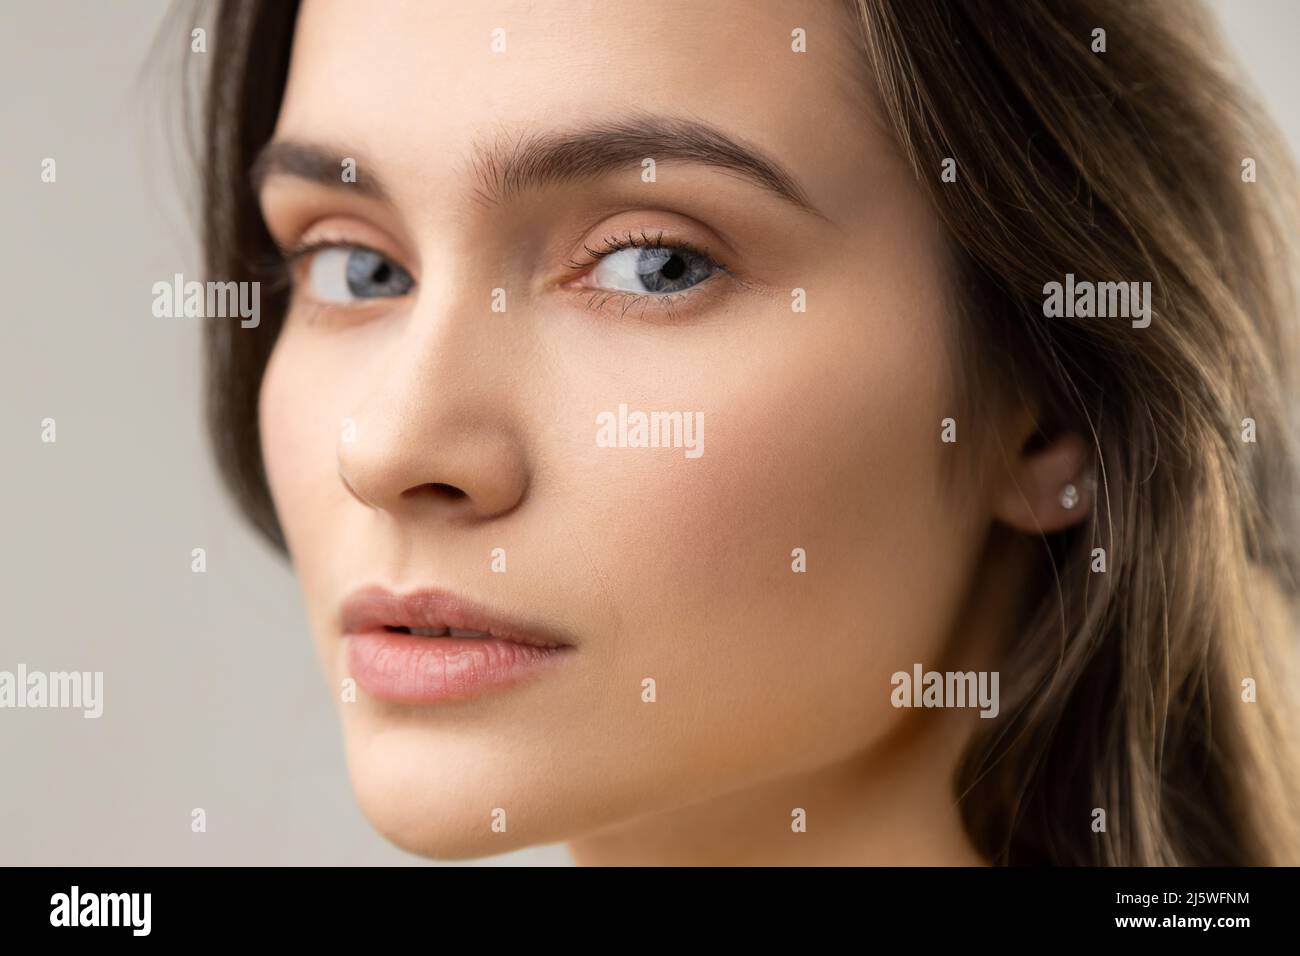 Closeup beauty portrait of beautiful woman with perfect skin, looking at camera with calm expression, wearing casual style jacket. Indoor studio shot isolated on gray background. Stock Photo